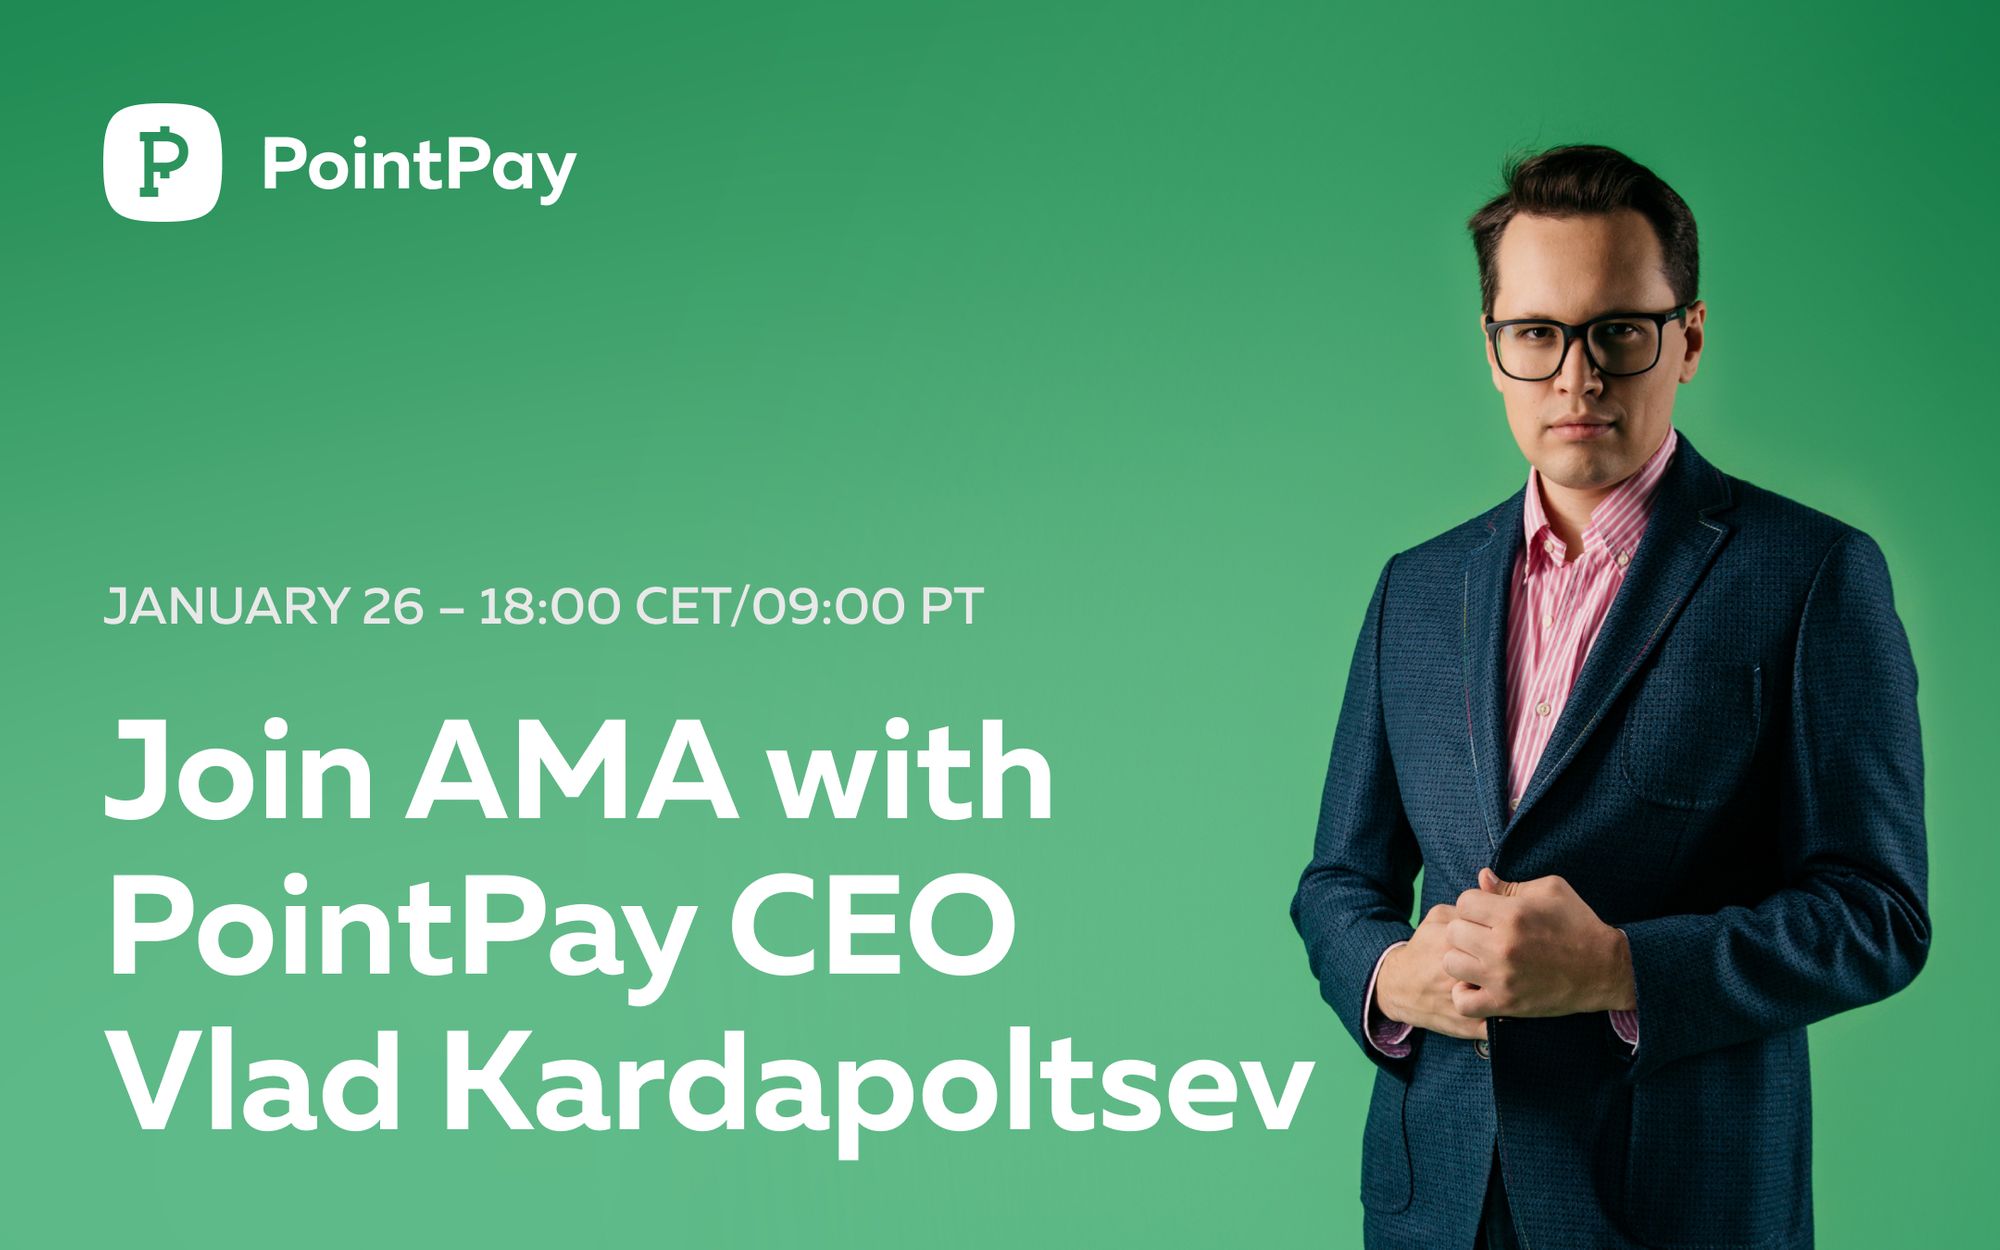 Join AMA with PointPay CEO Vladimir Kardapoltsev on the 26th of January (18:00 CET time)